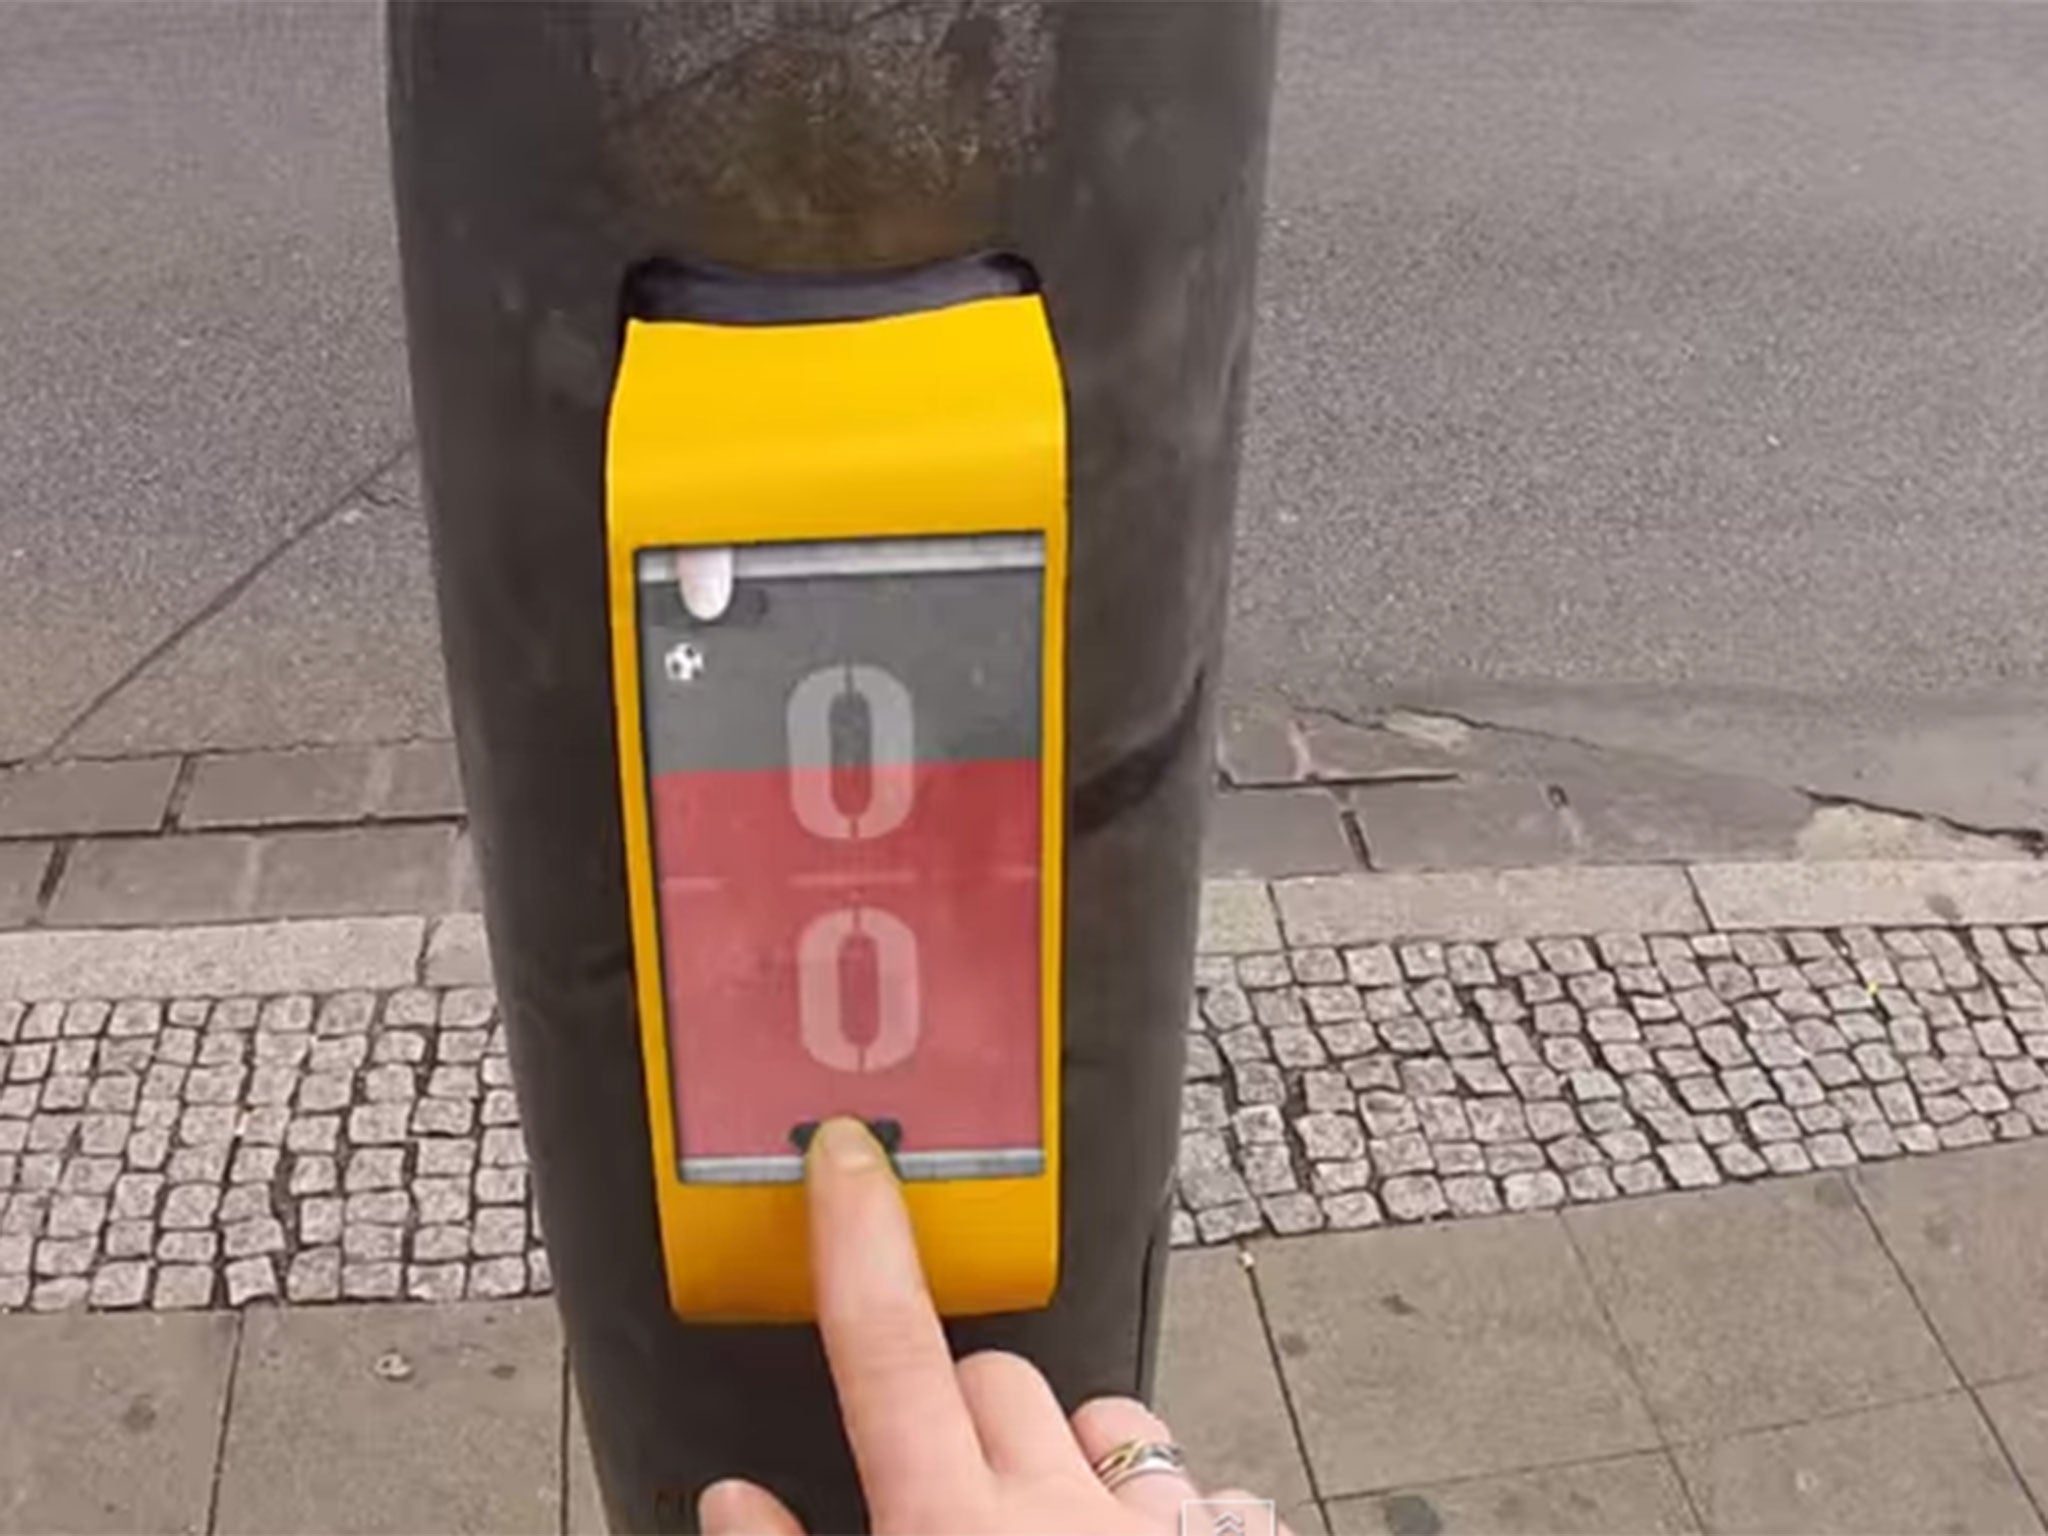 A handset created in Germany that allows users to play each other at Pong while waiting to cross the street